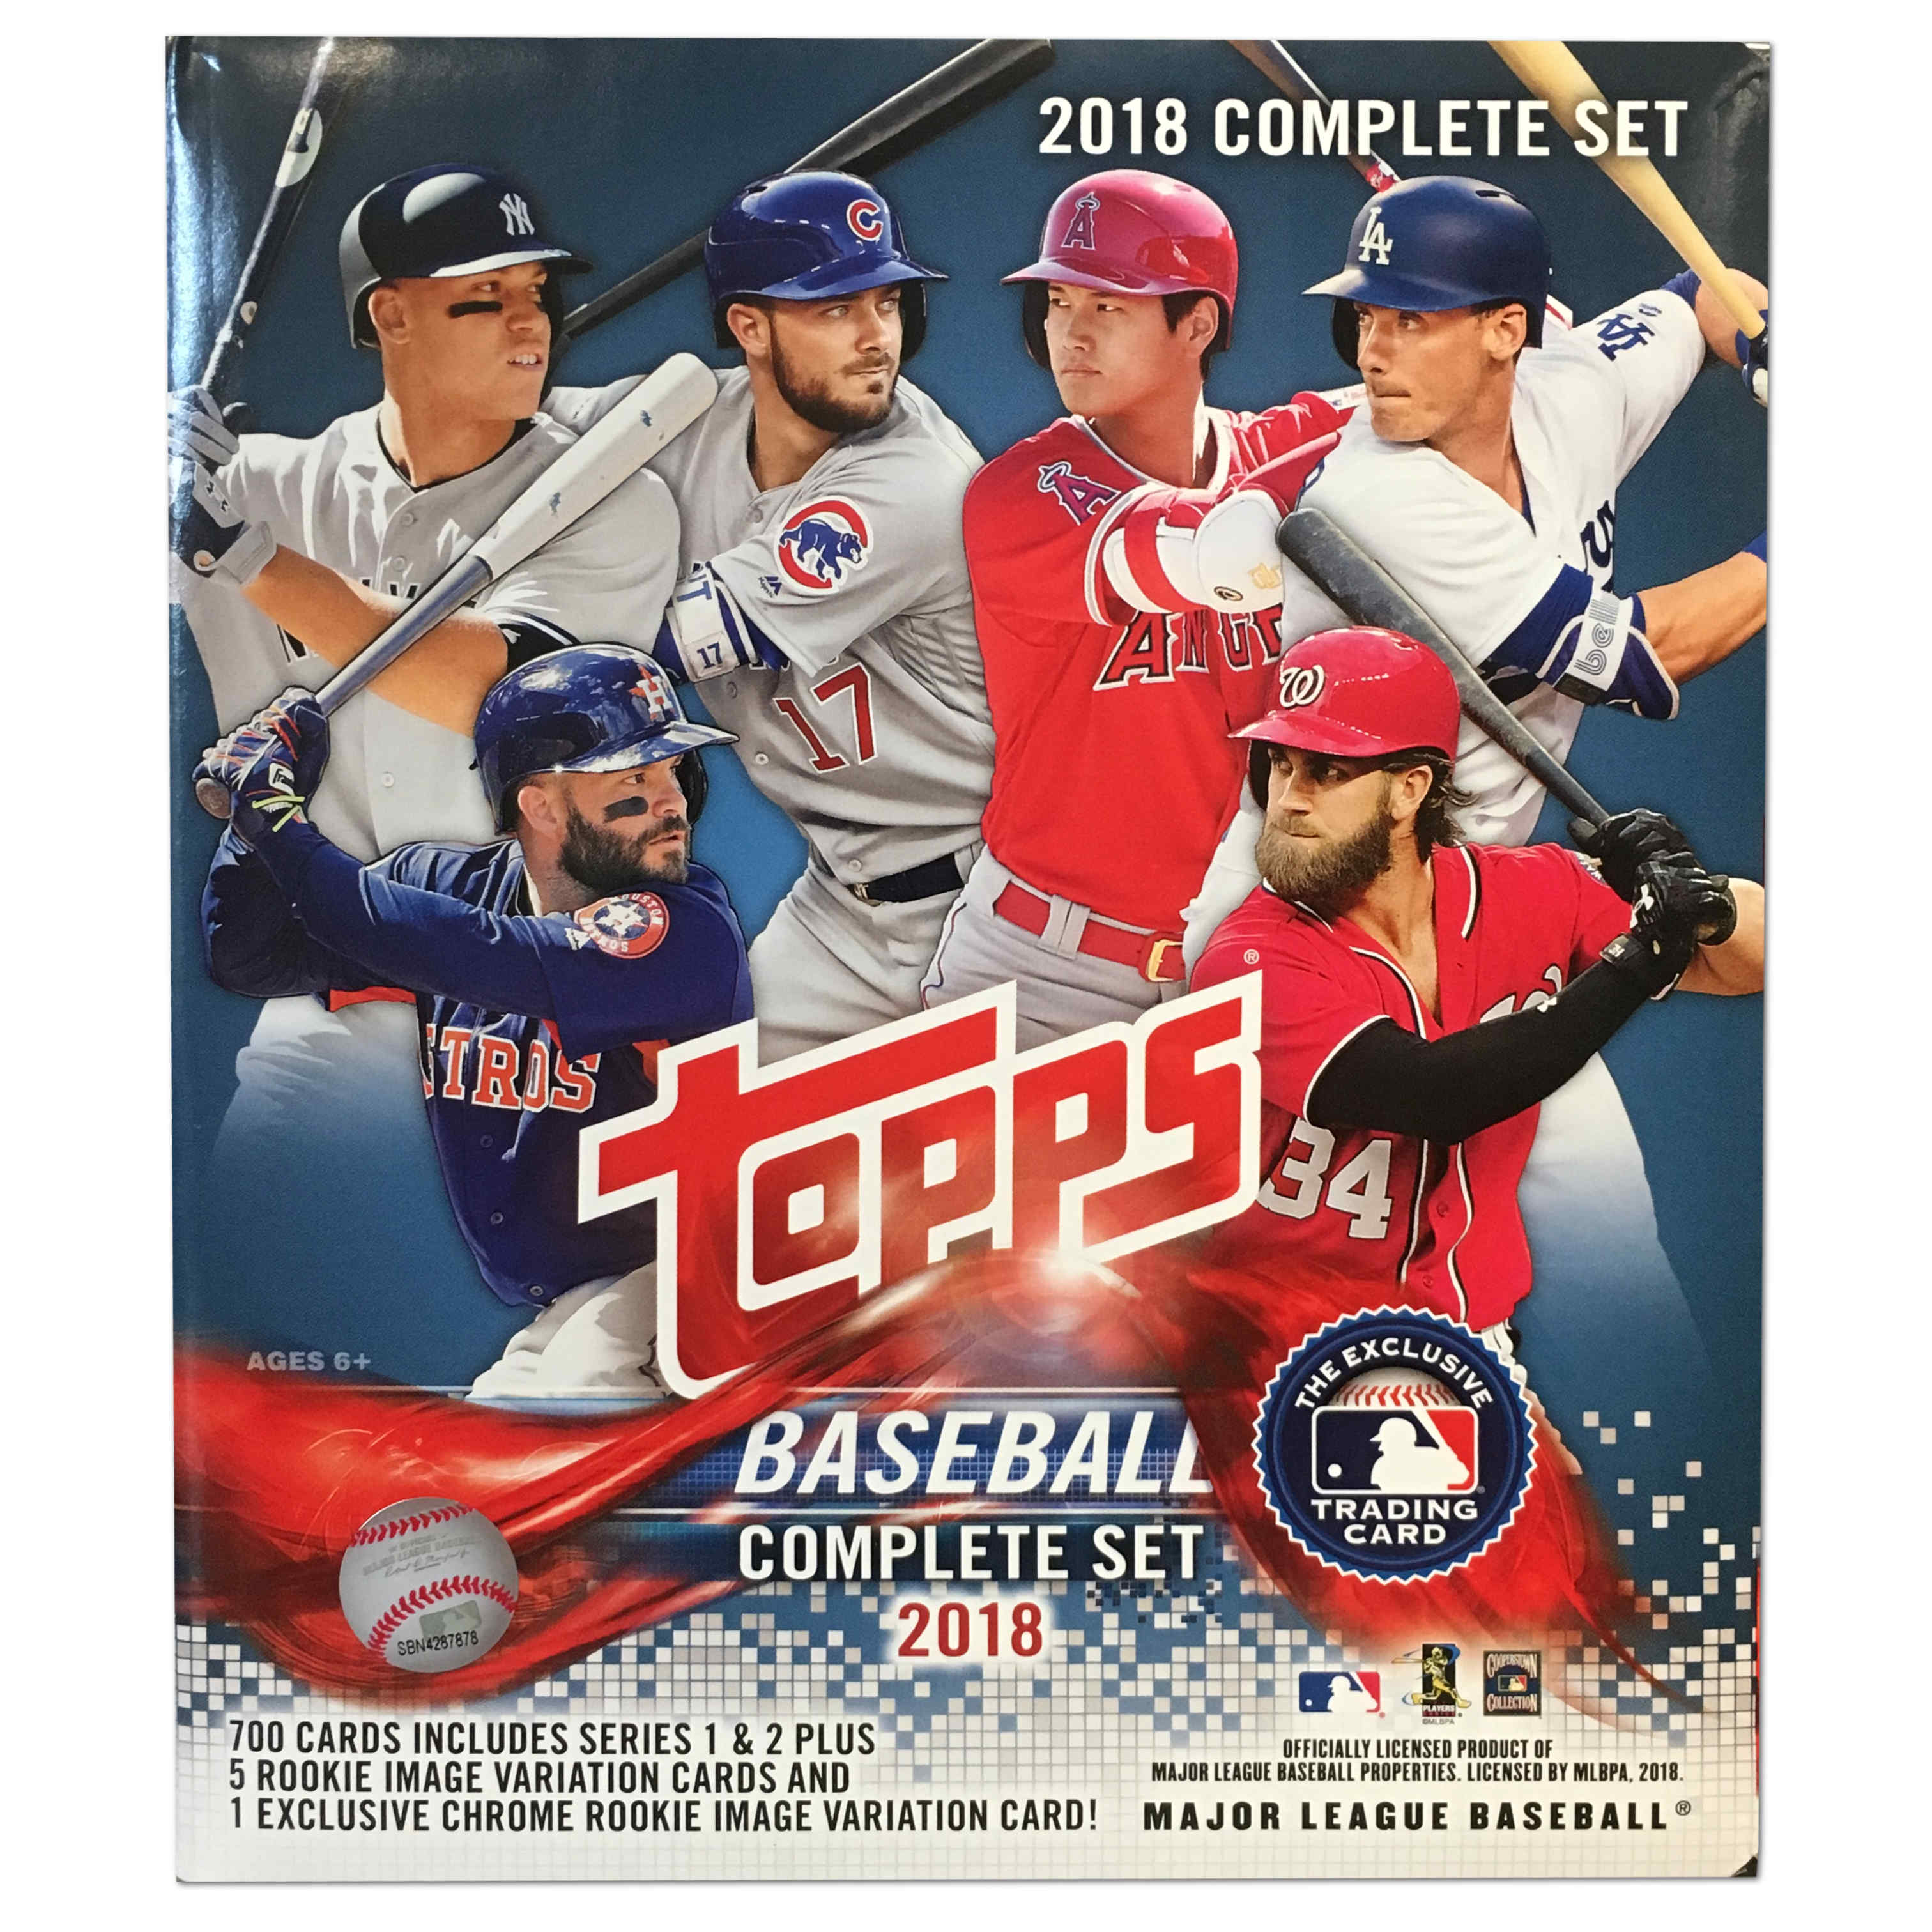 2018 Topps MLB Baseball Complete Set Special Edition Trading Cards- Rookies include Ronald Acuna Jr, Juan Soto, Shohei Ohtani - image 2 of 2